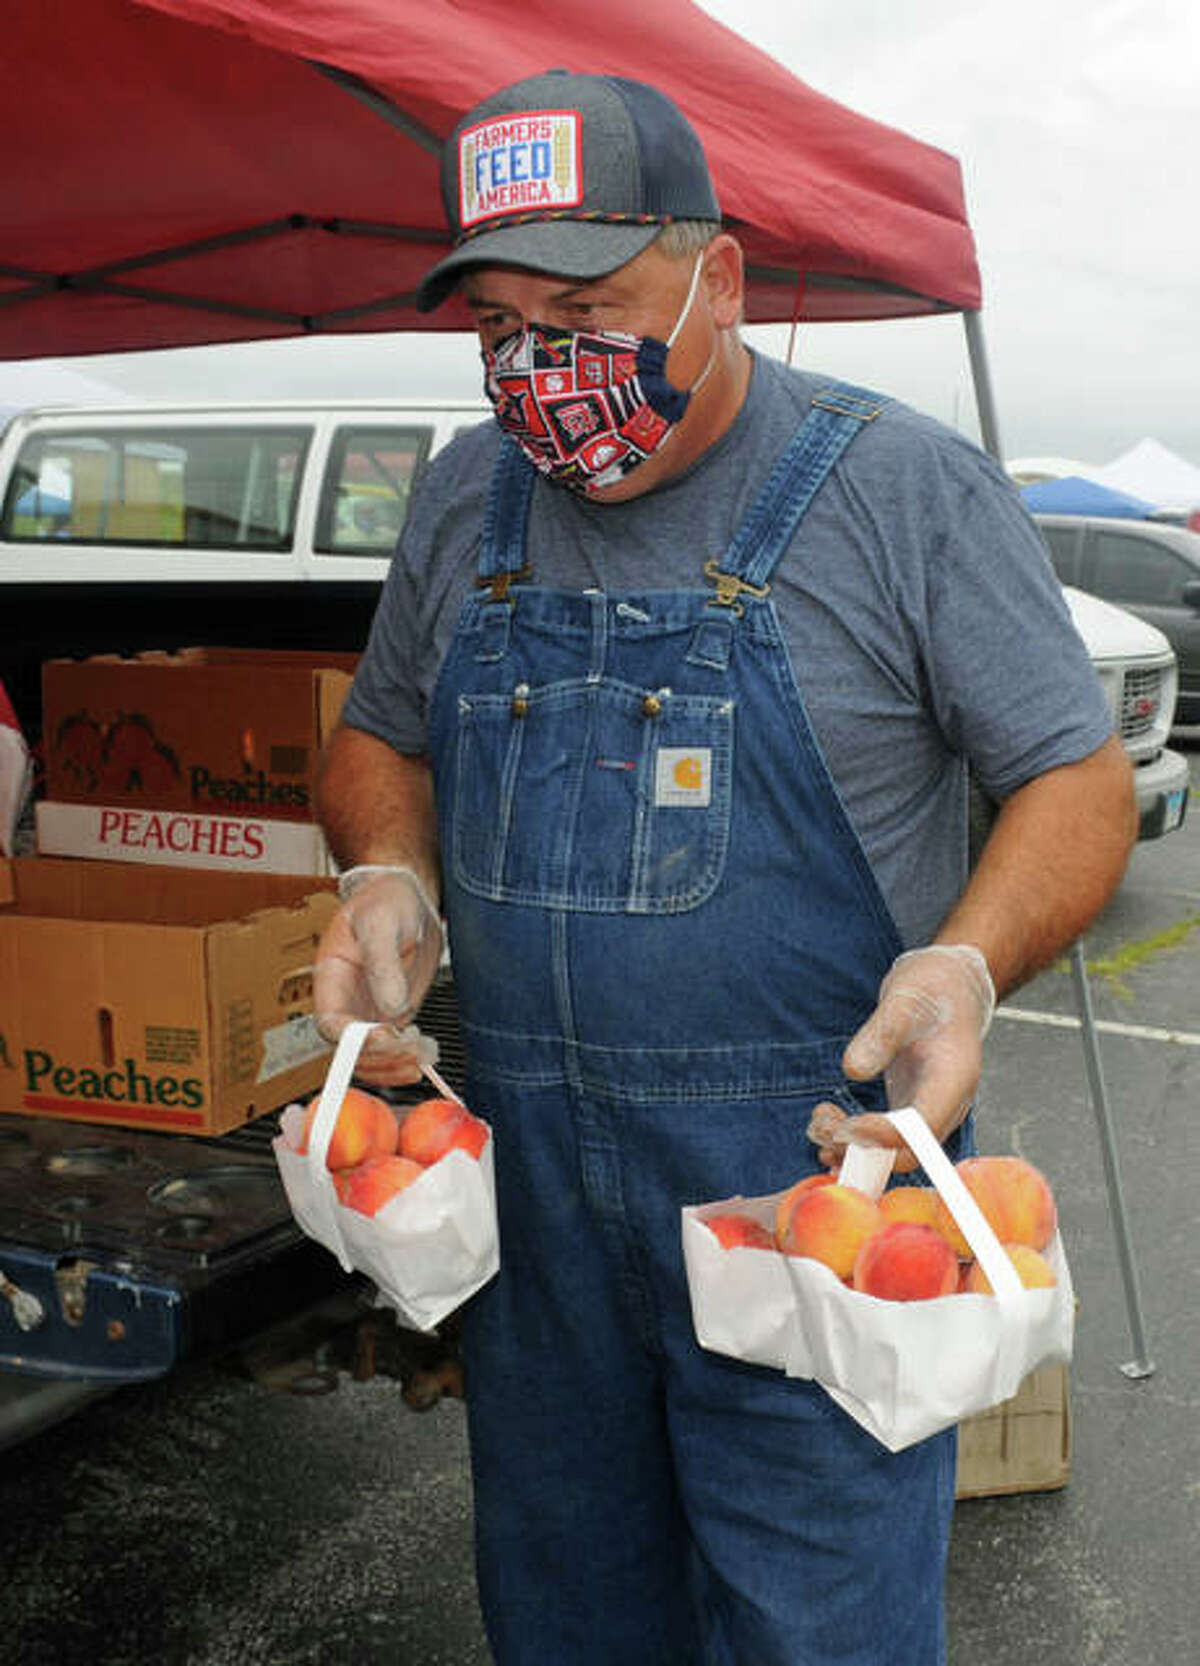 Peach pickin’ time in Calhoun County peach growers open for business